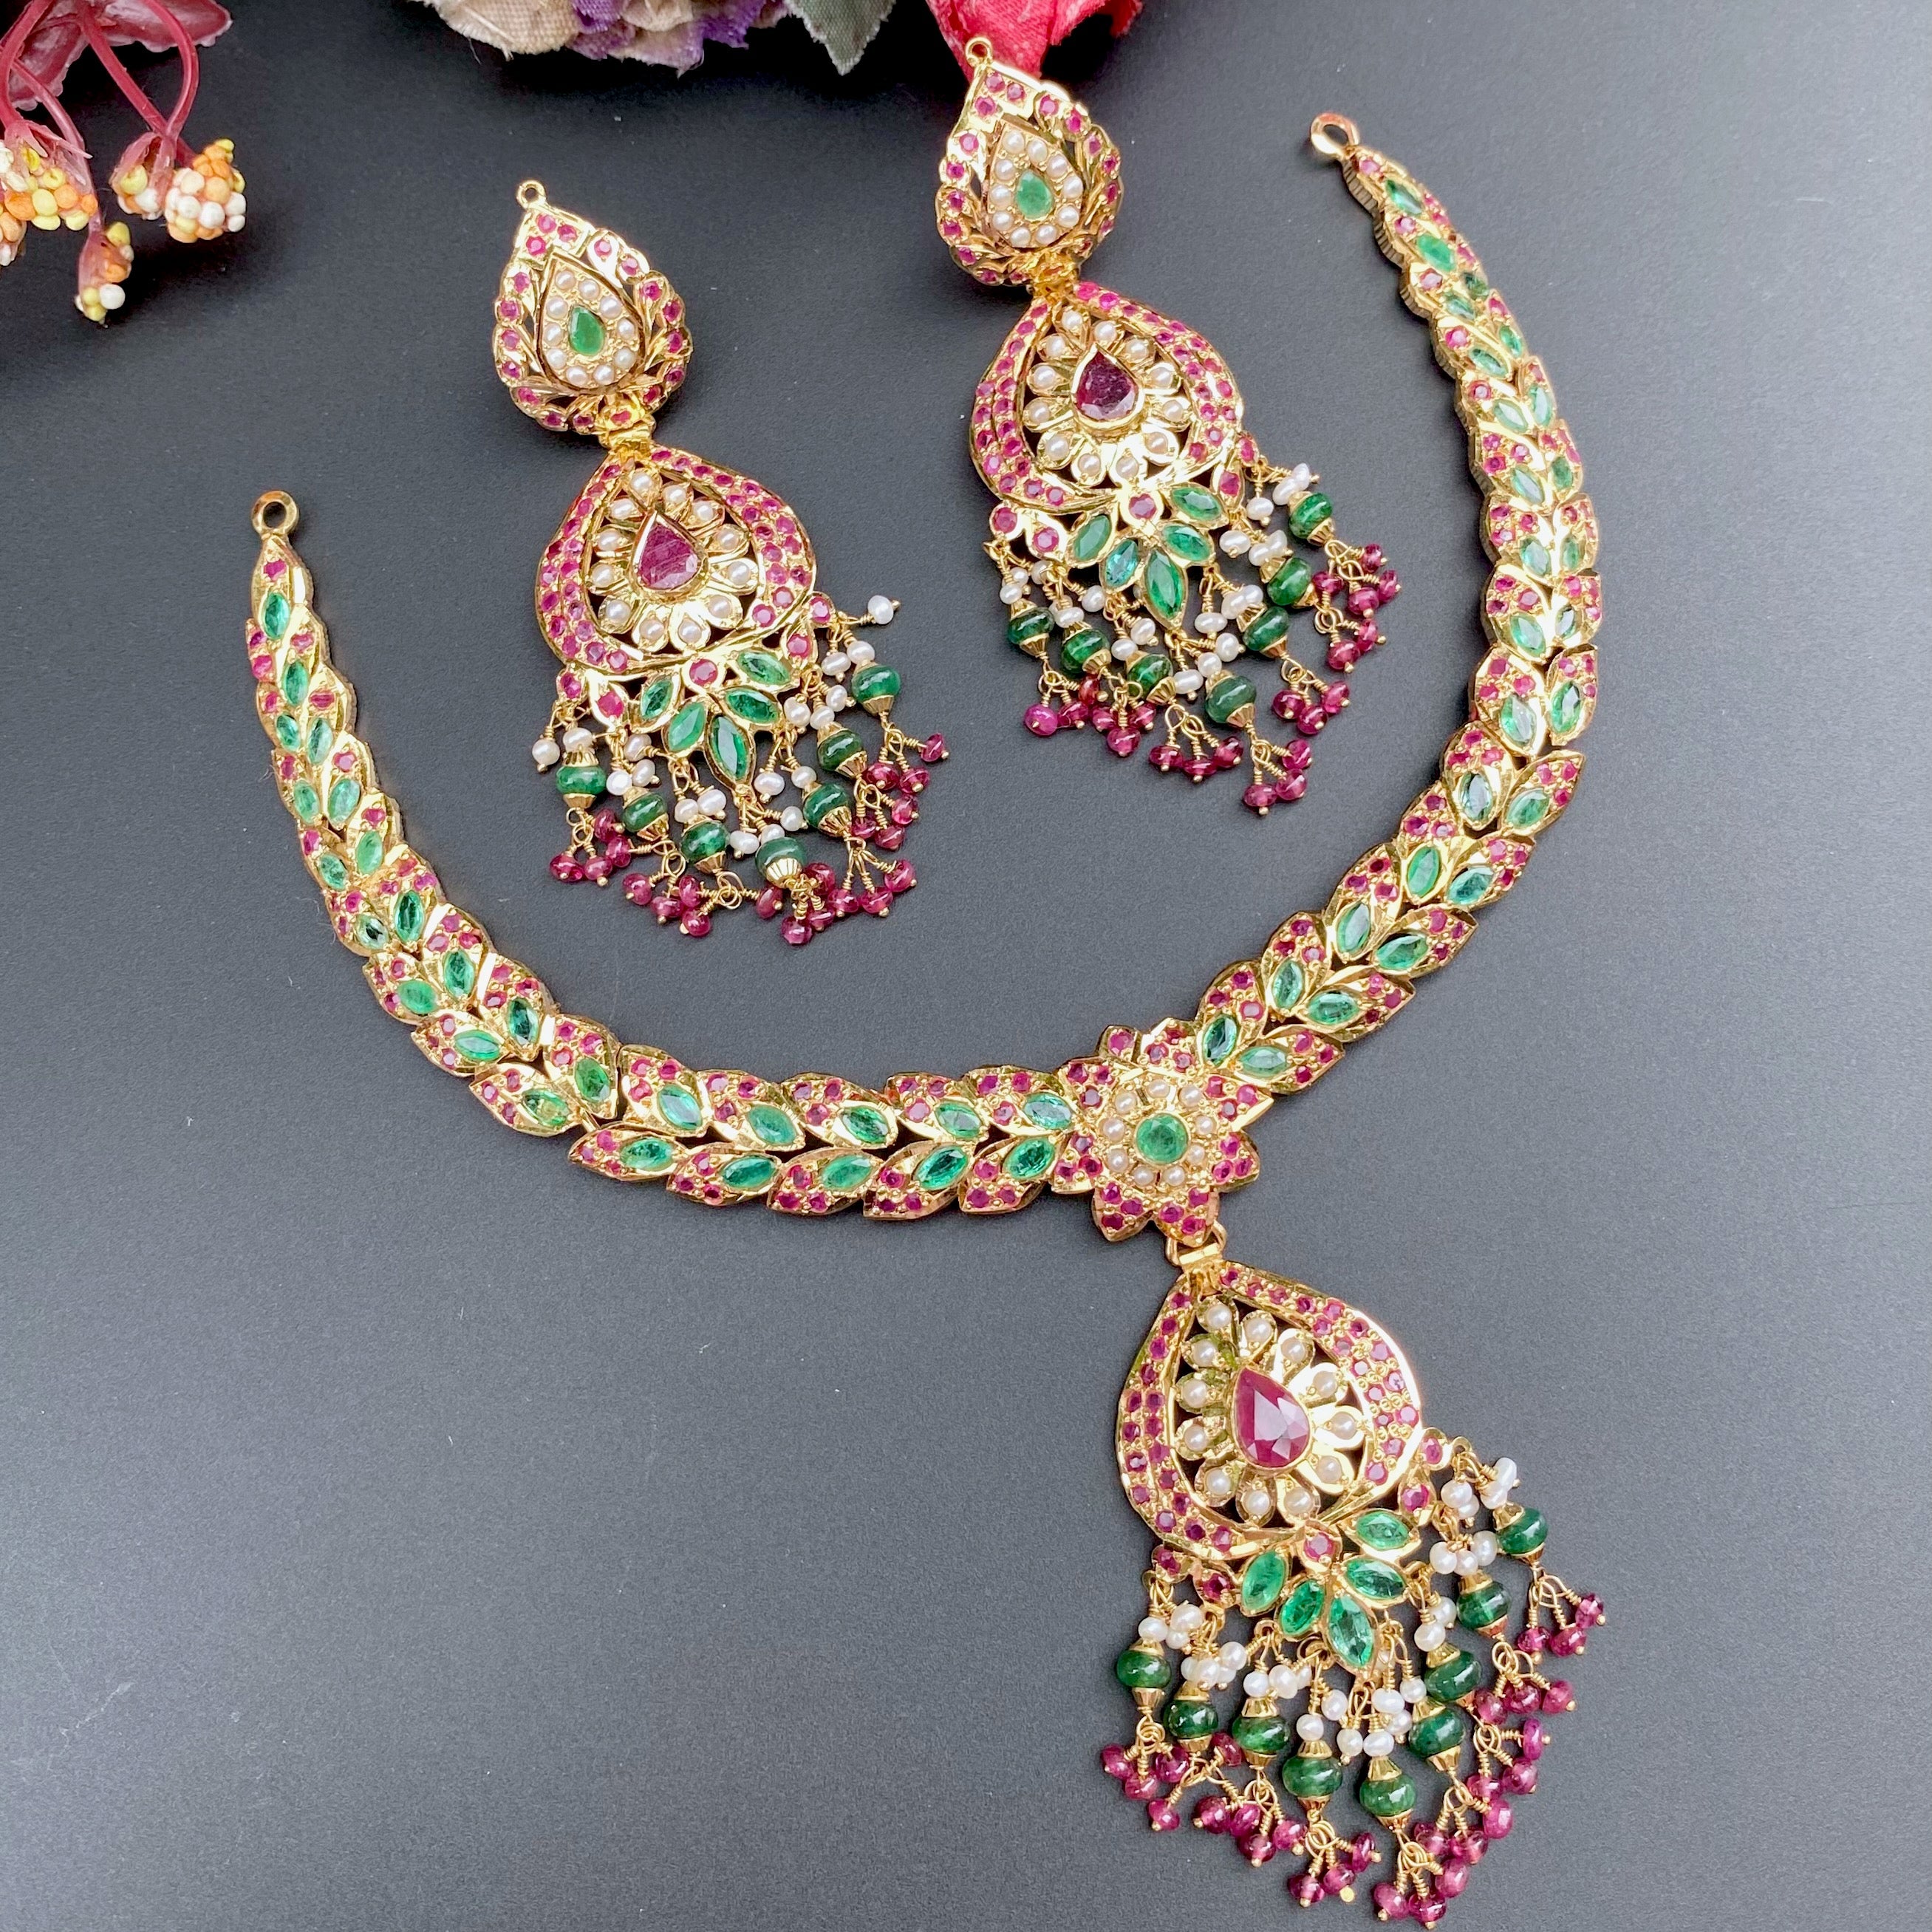 22 carat gold necklace set with earrings under 2 lakh for rajasthani bride